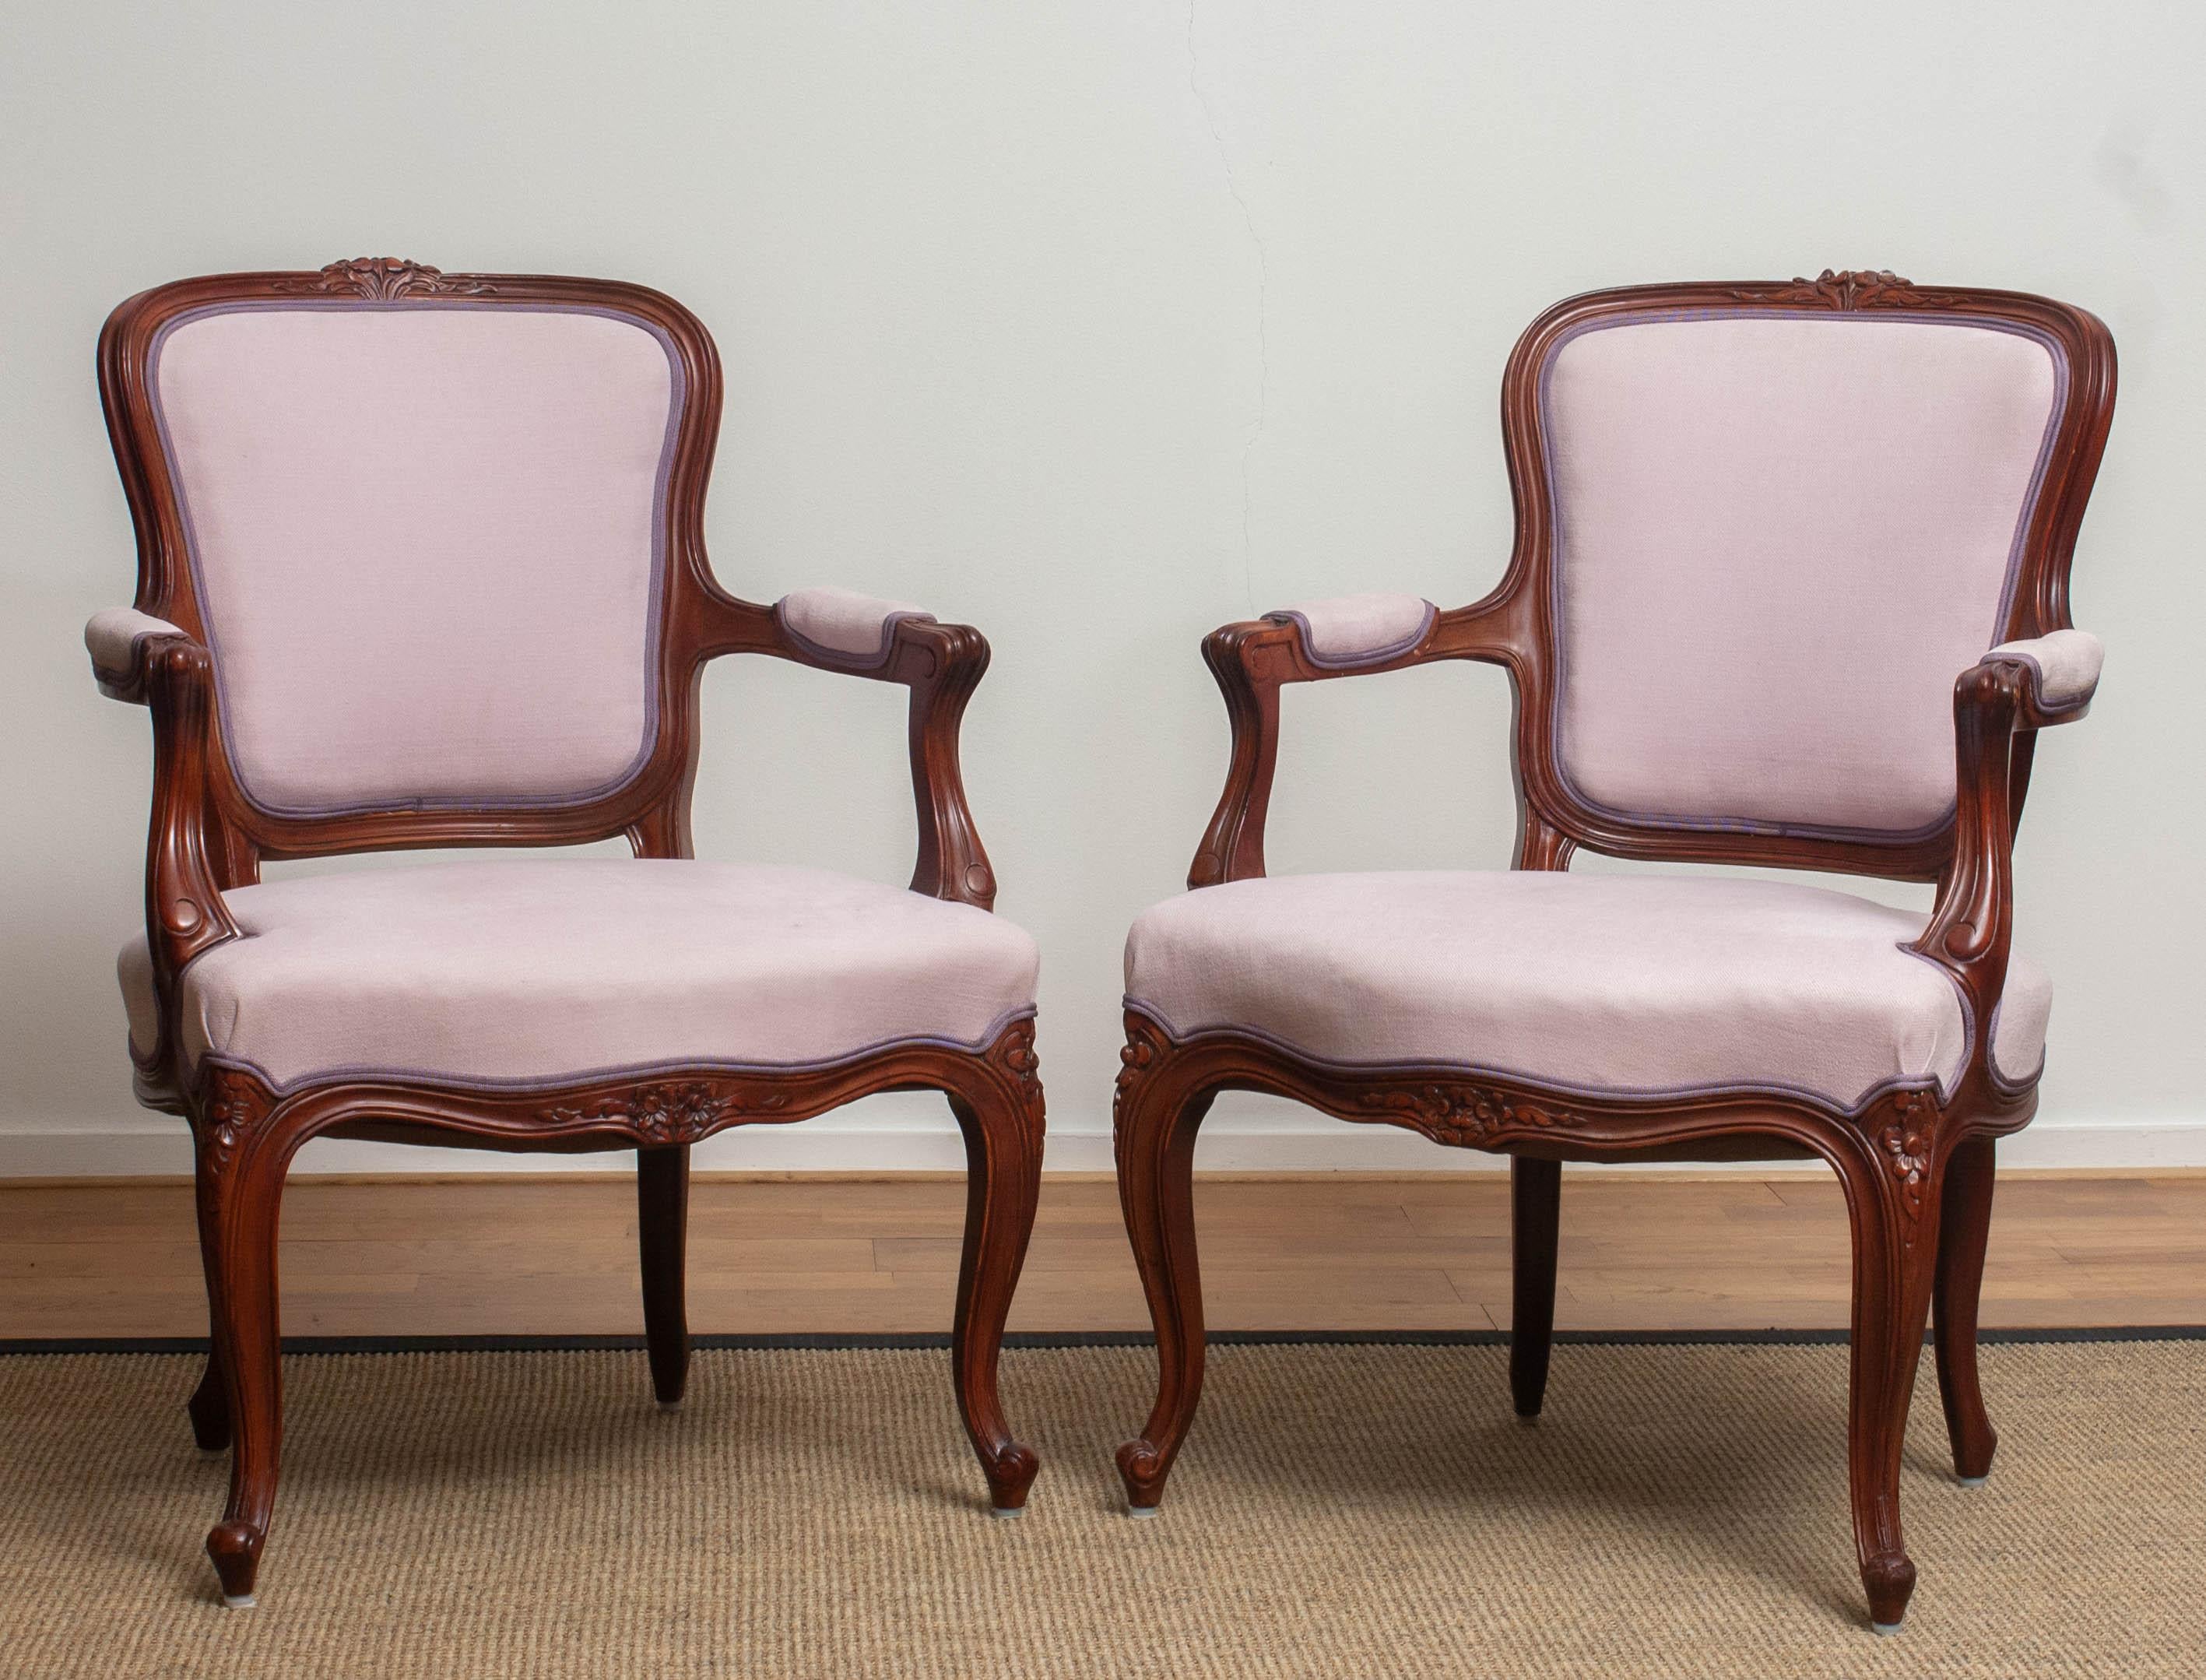 Fabric 1950s Pair of Pink Swedish Rococo Bergères in the Shabby Chic Technique Chairs F